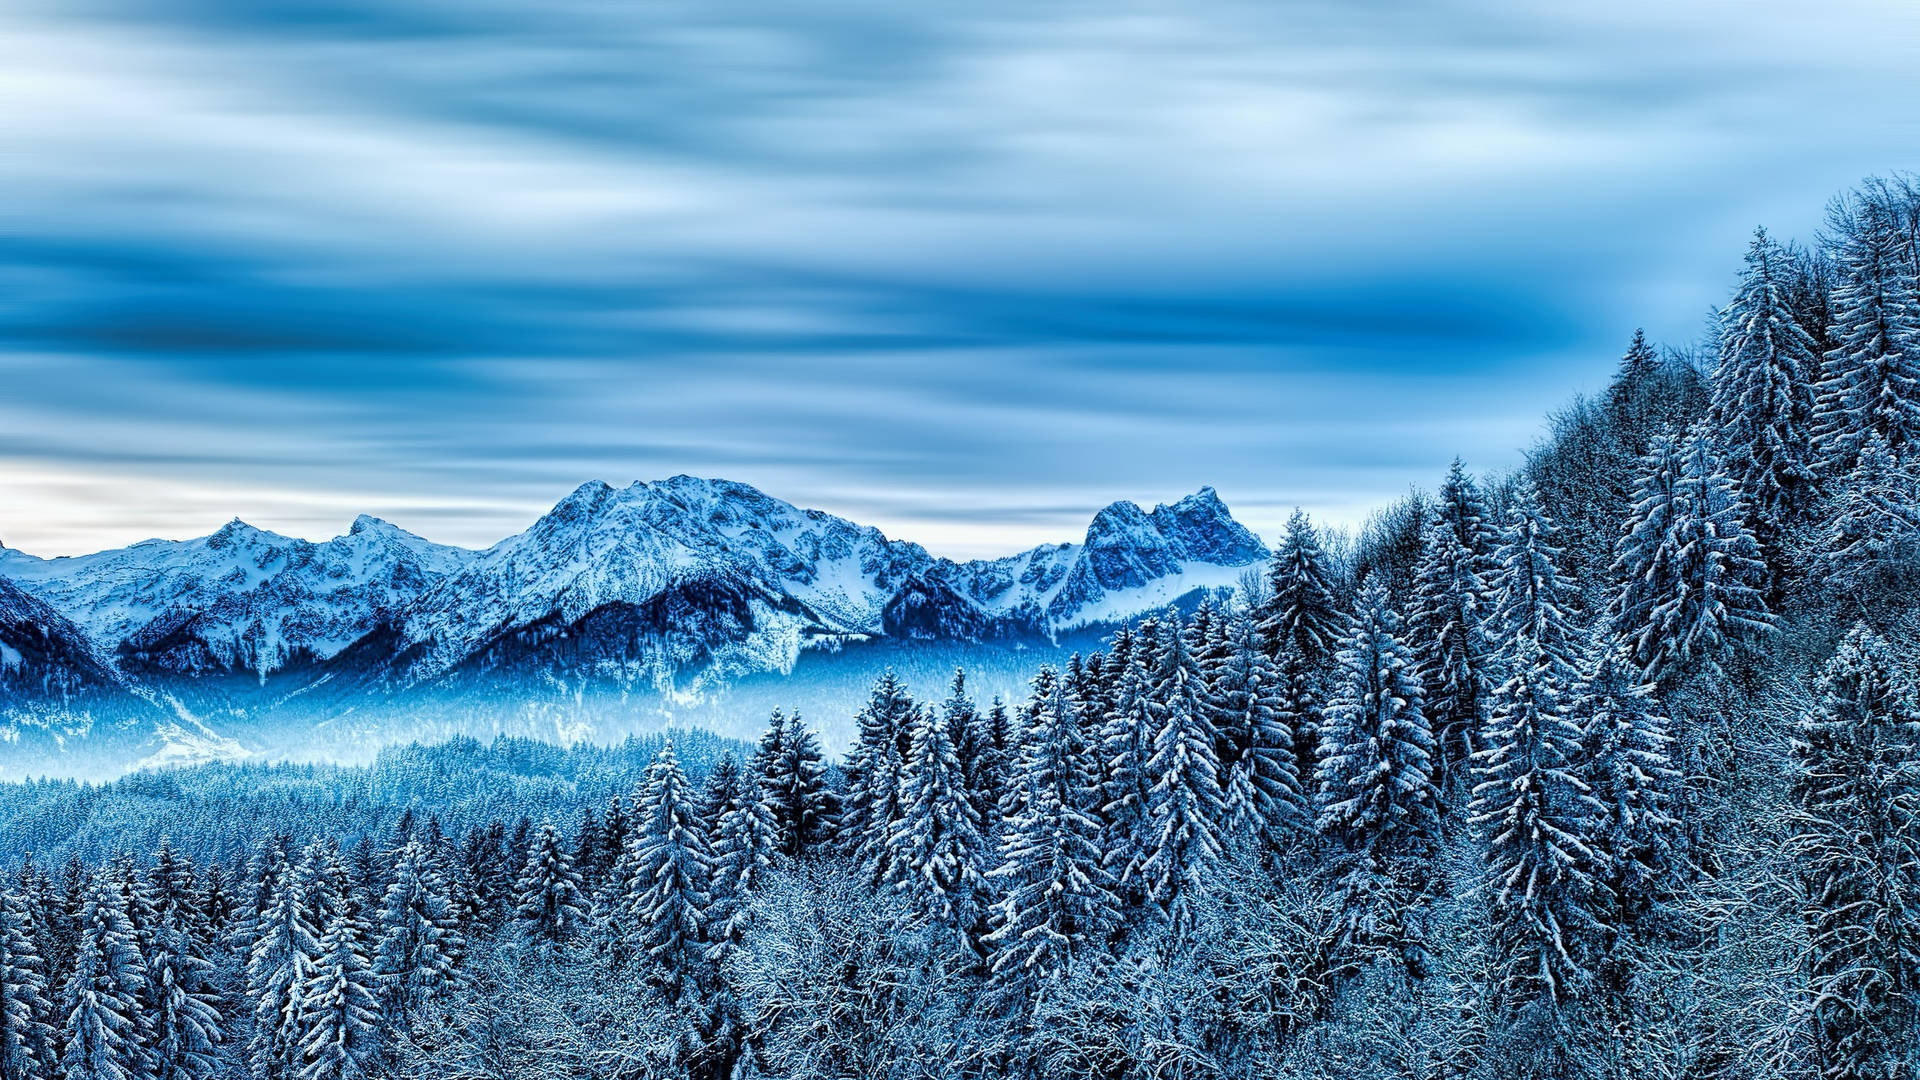 A Snowy Mountain Range With Trees And A Blue Sky Background